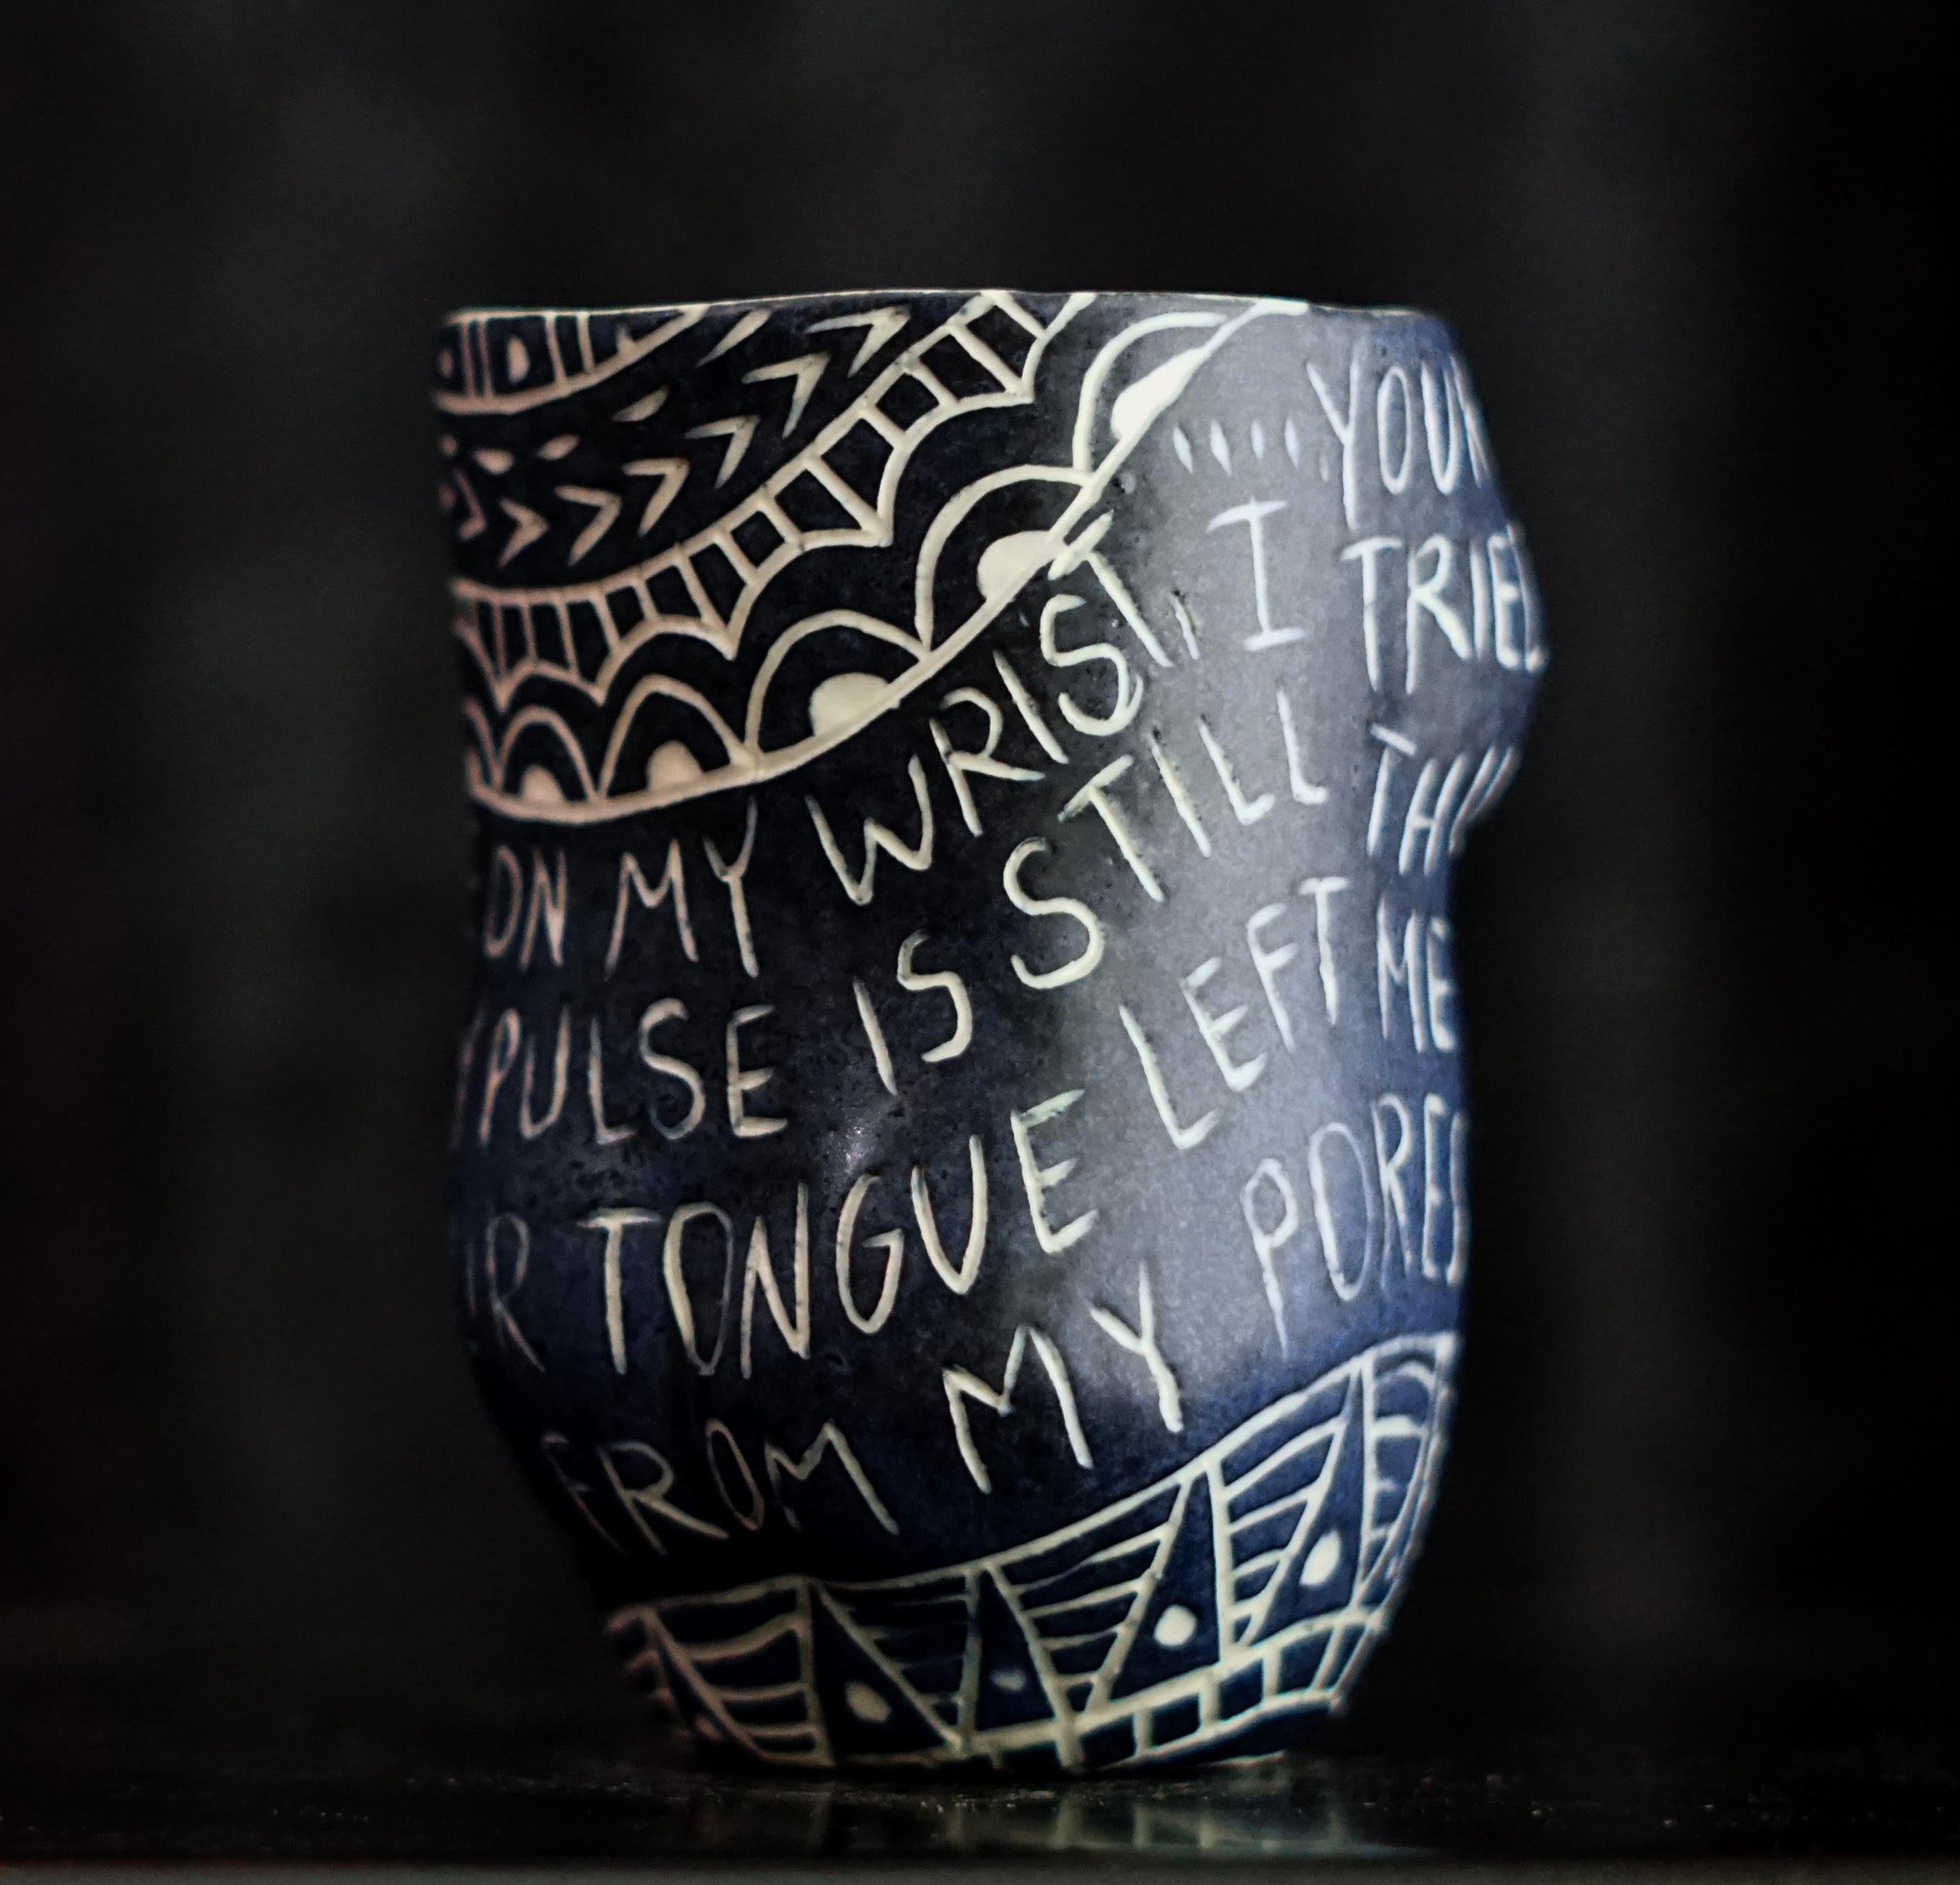 “Your Lipstick Left a Bruise..” Porcelain cup with sgraffito detailing For Sale 1